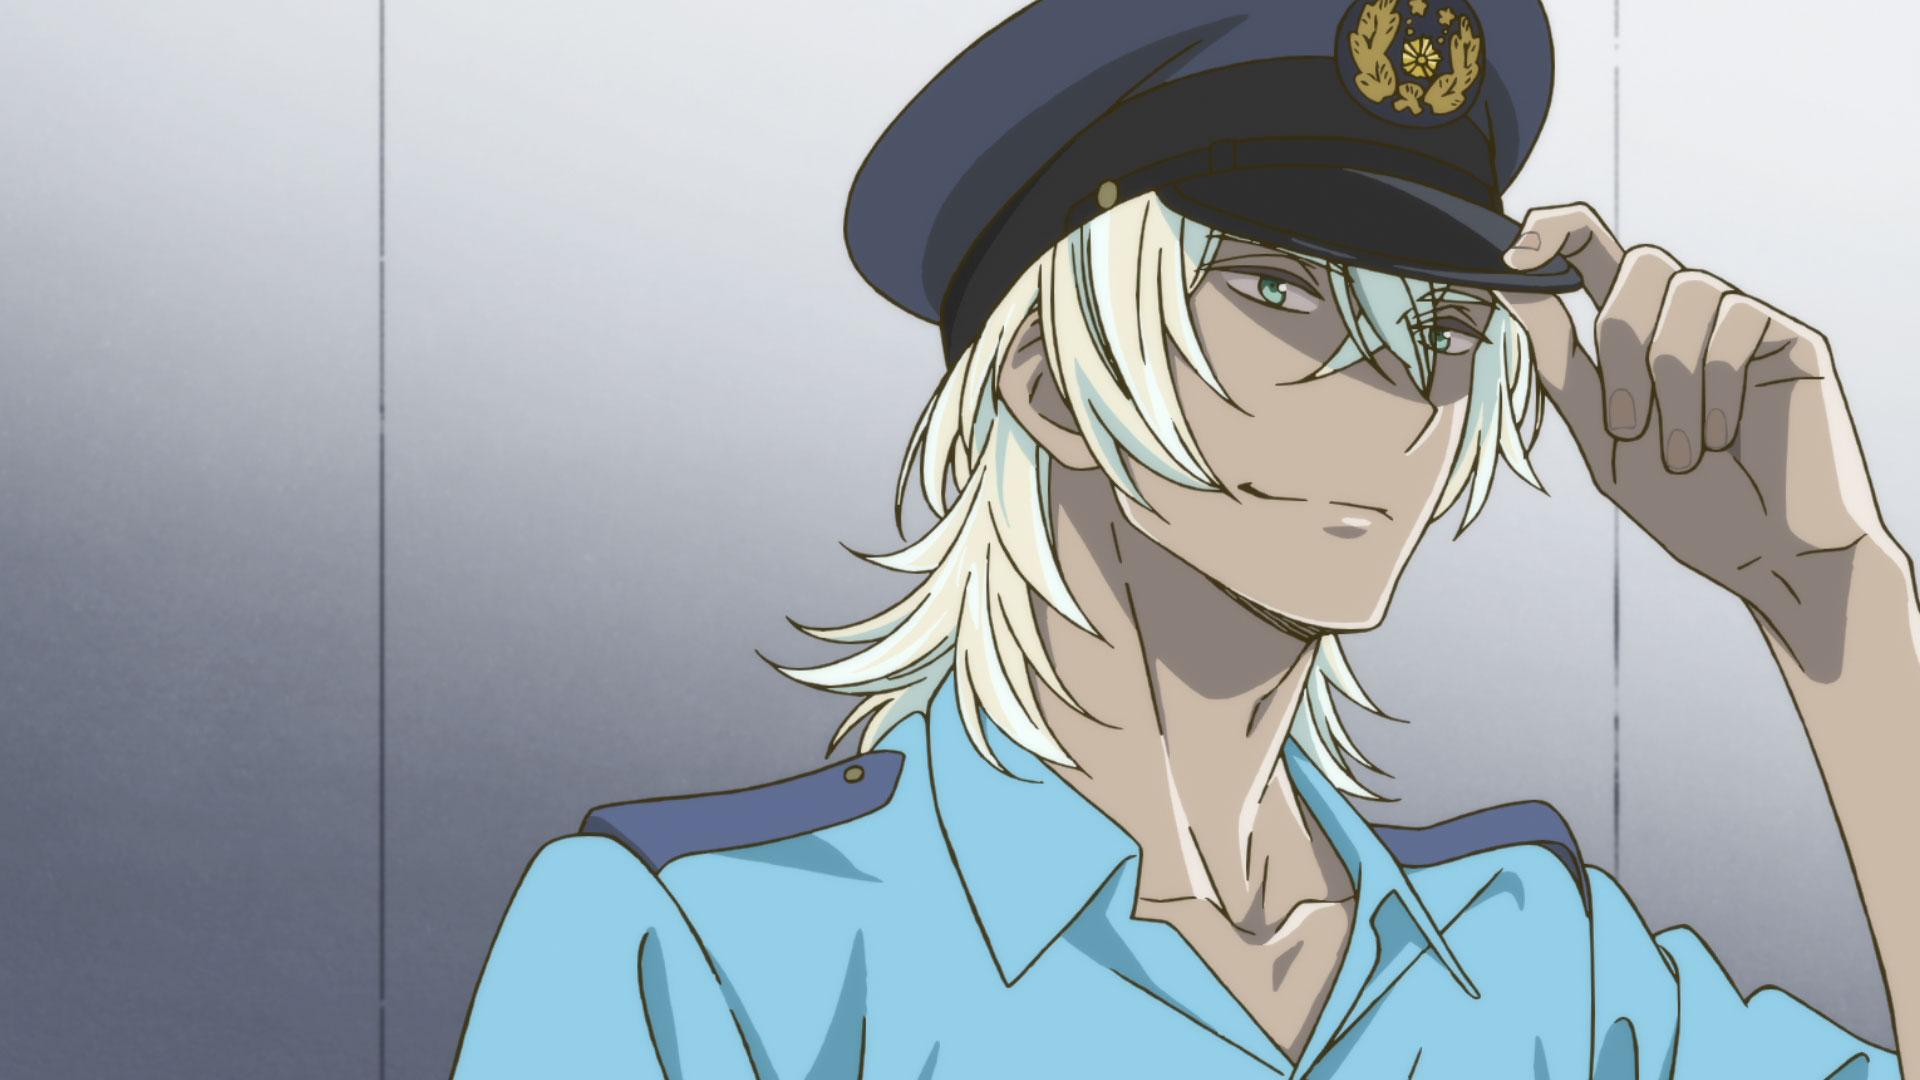 Sarazanmai Episode 2 Synopsis, Preview Image, Release date